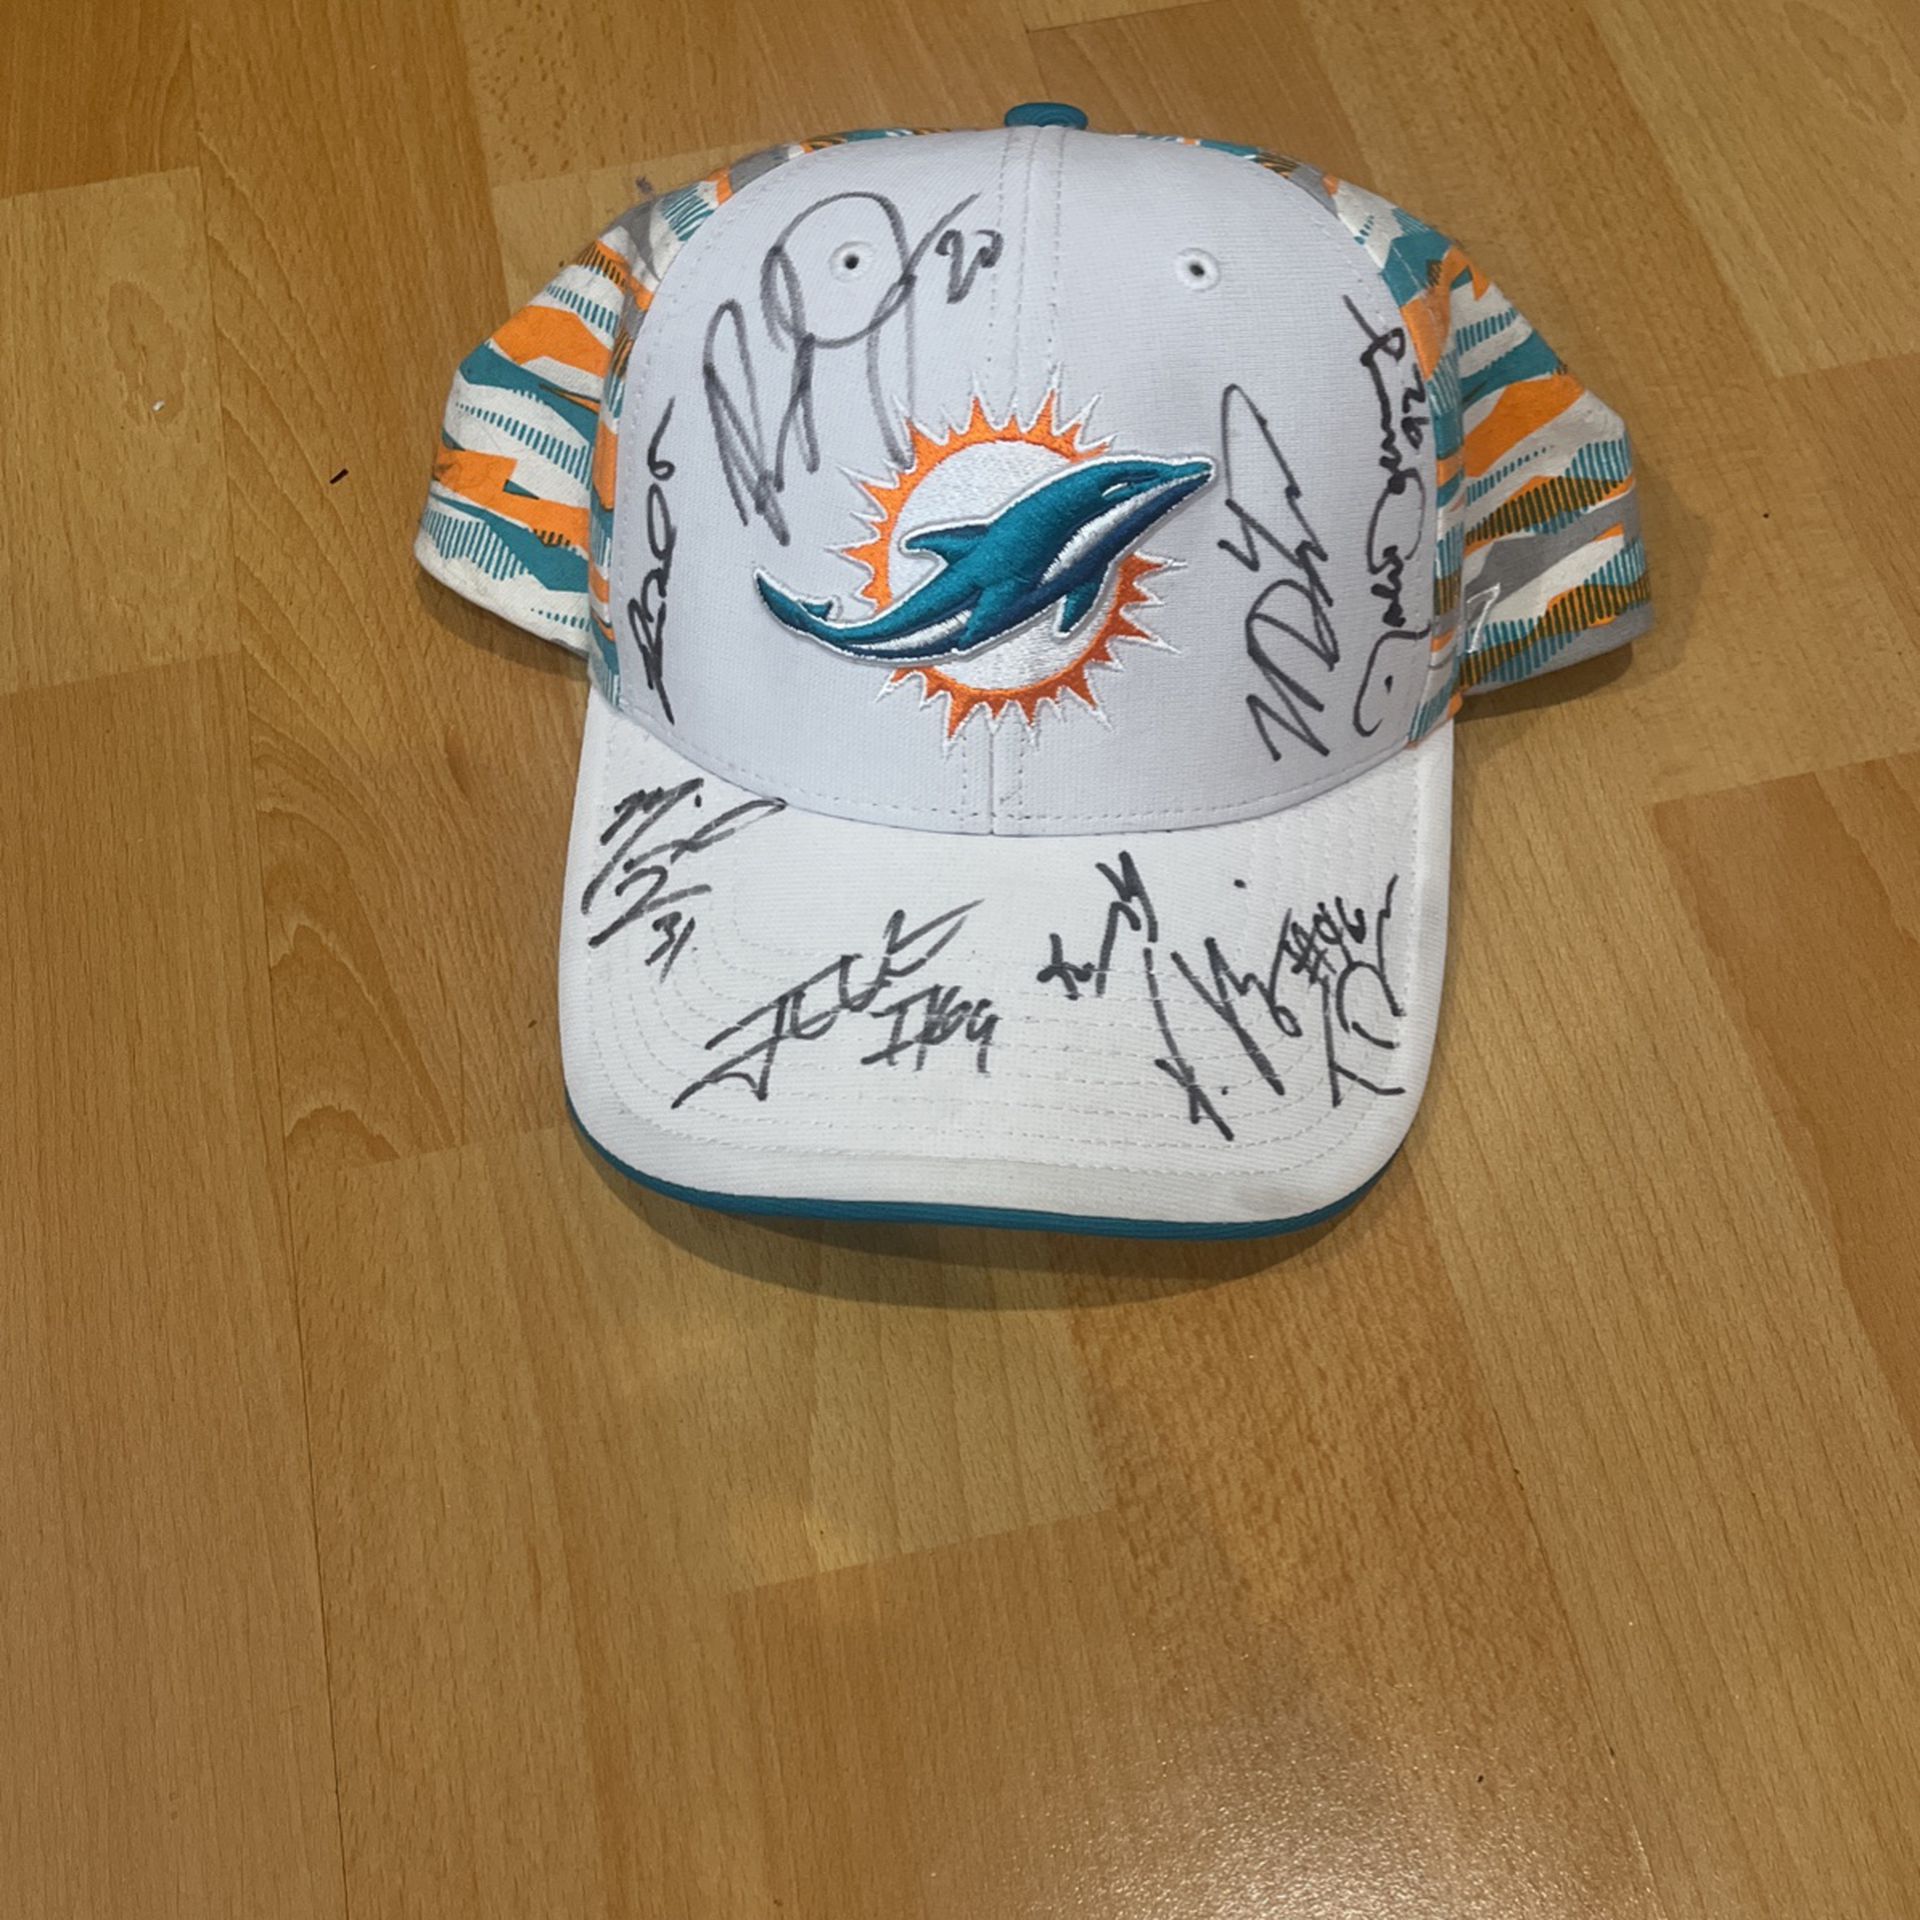 Miami Dolphins hat signed by 7 former players (Including Rashad Jones)+ TD the mascot